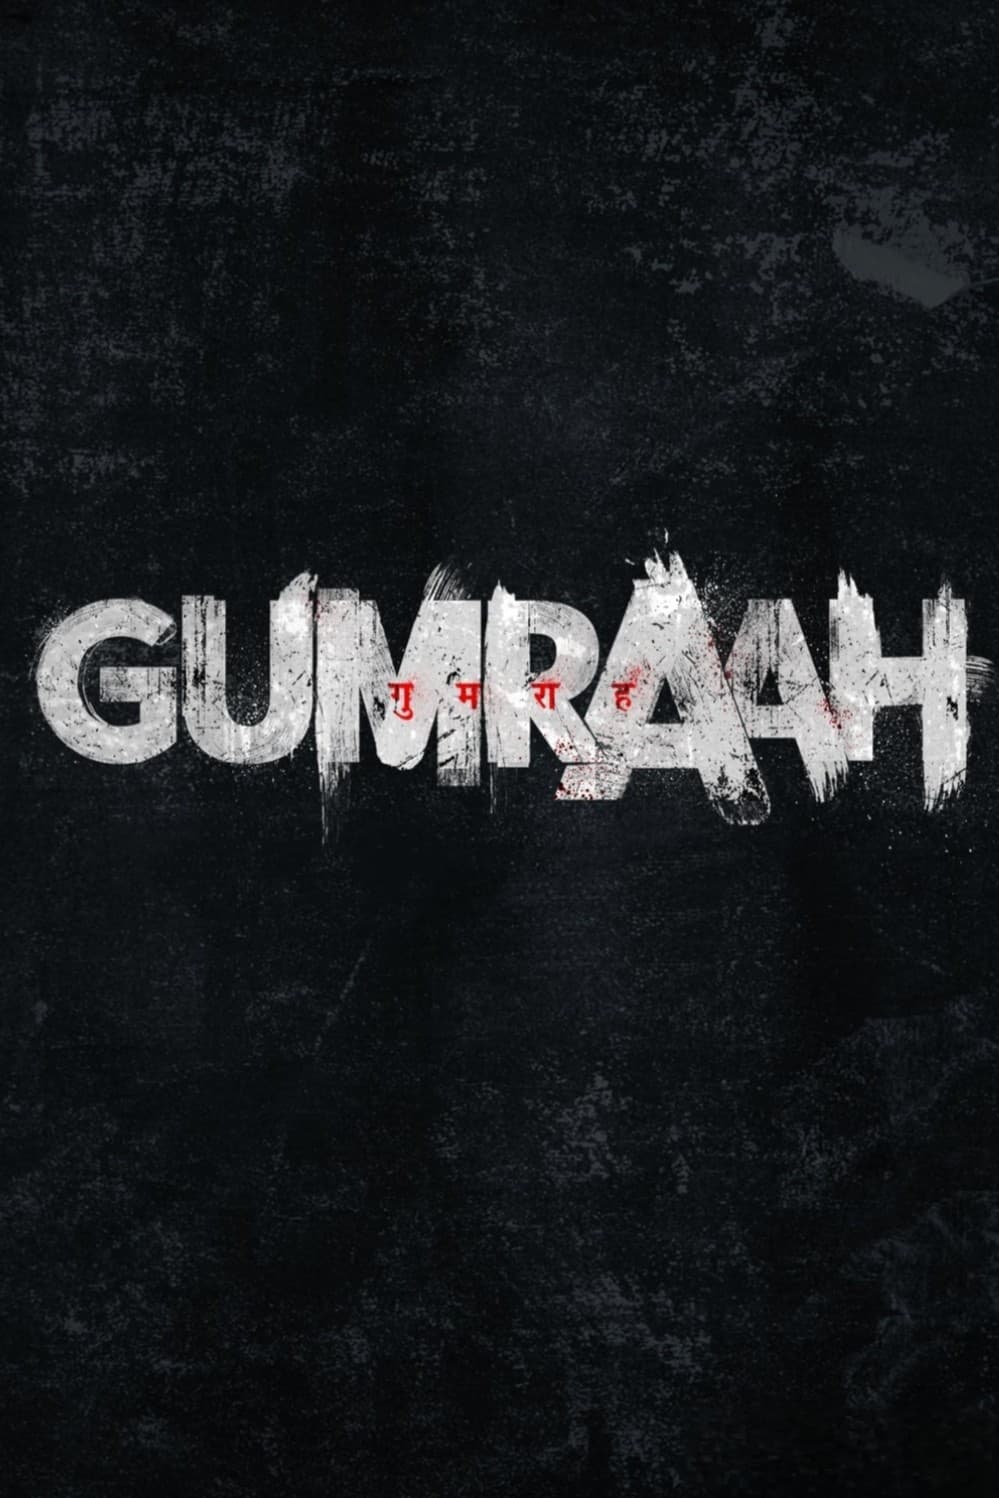 Poster for the movie "Gumraah"